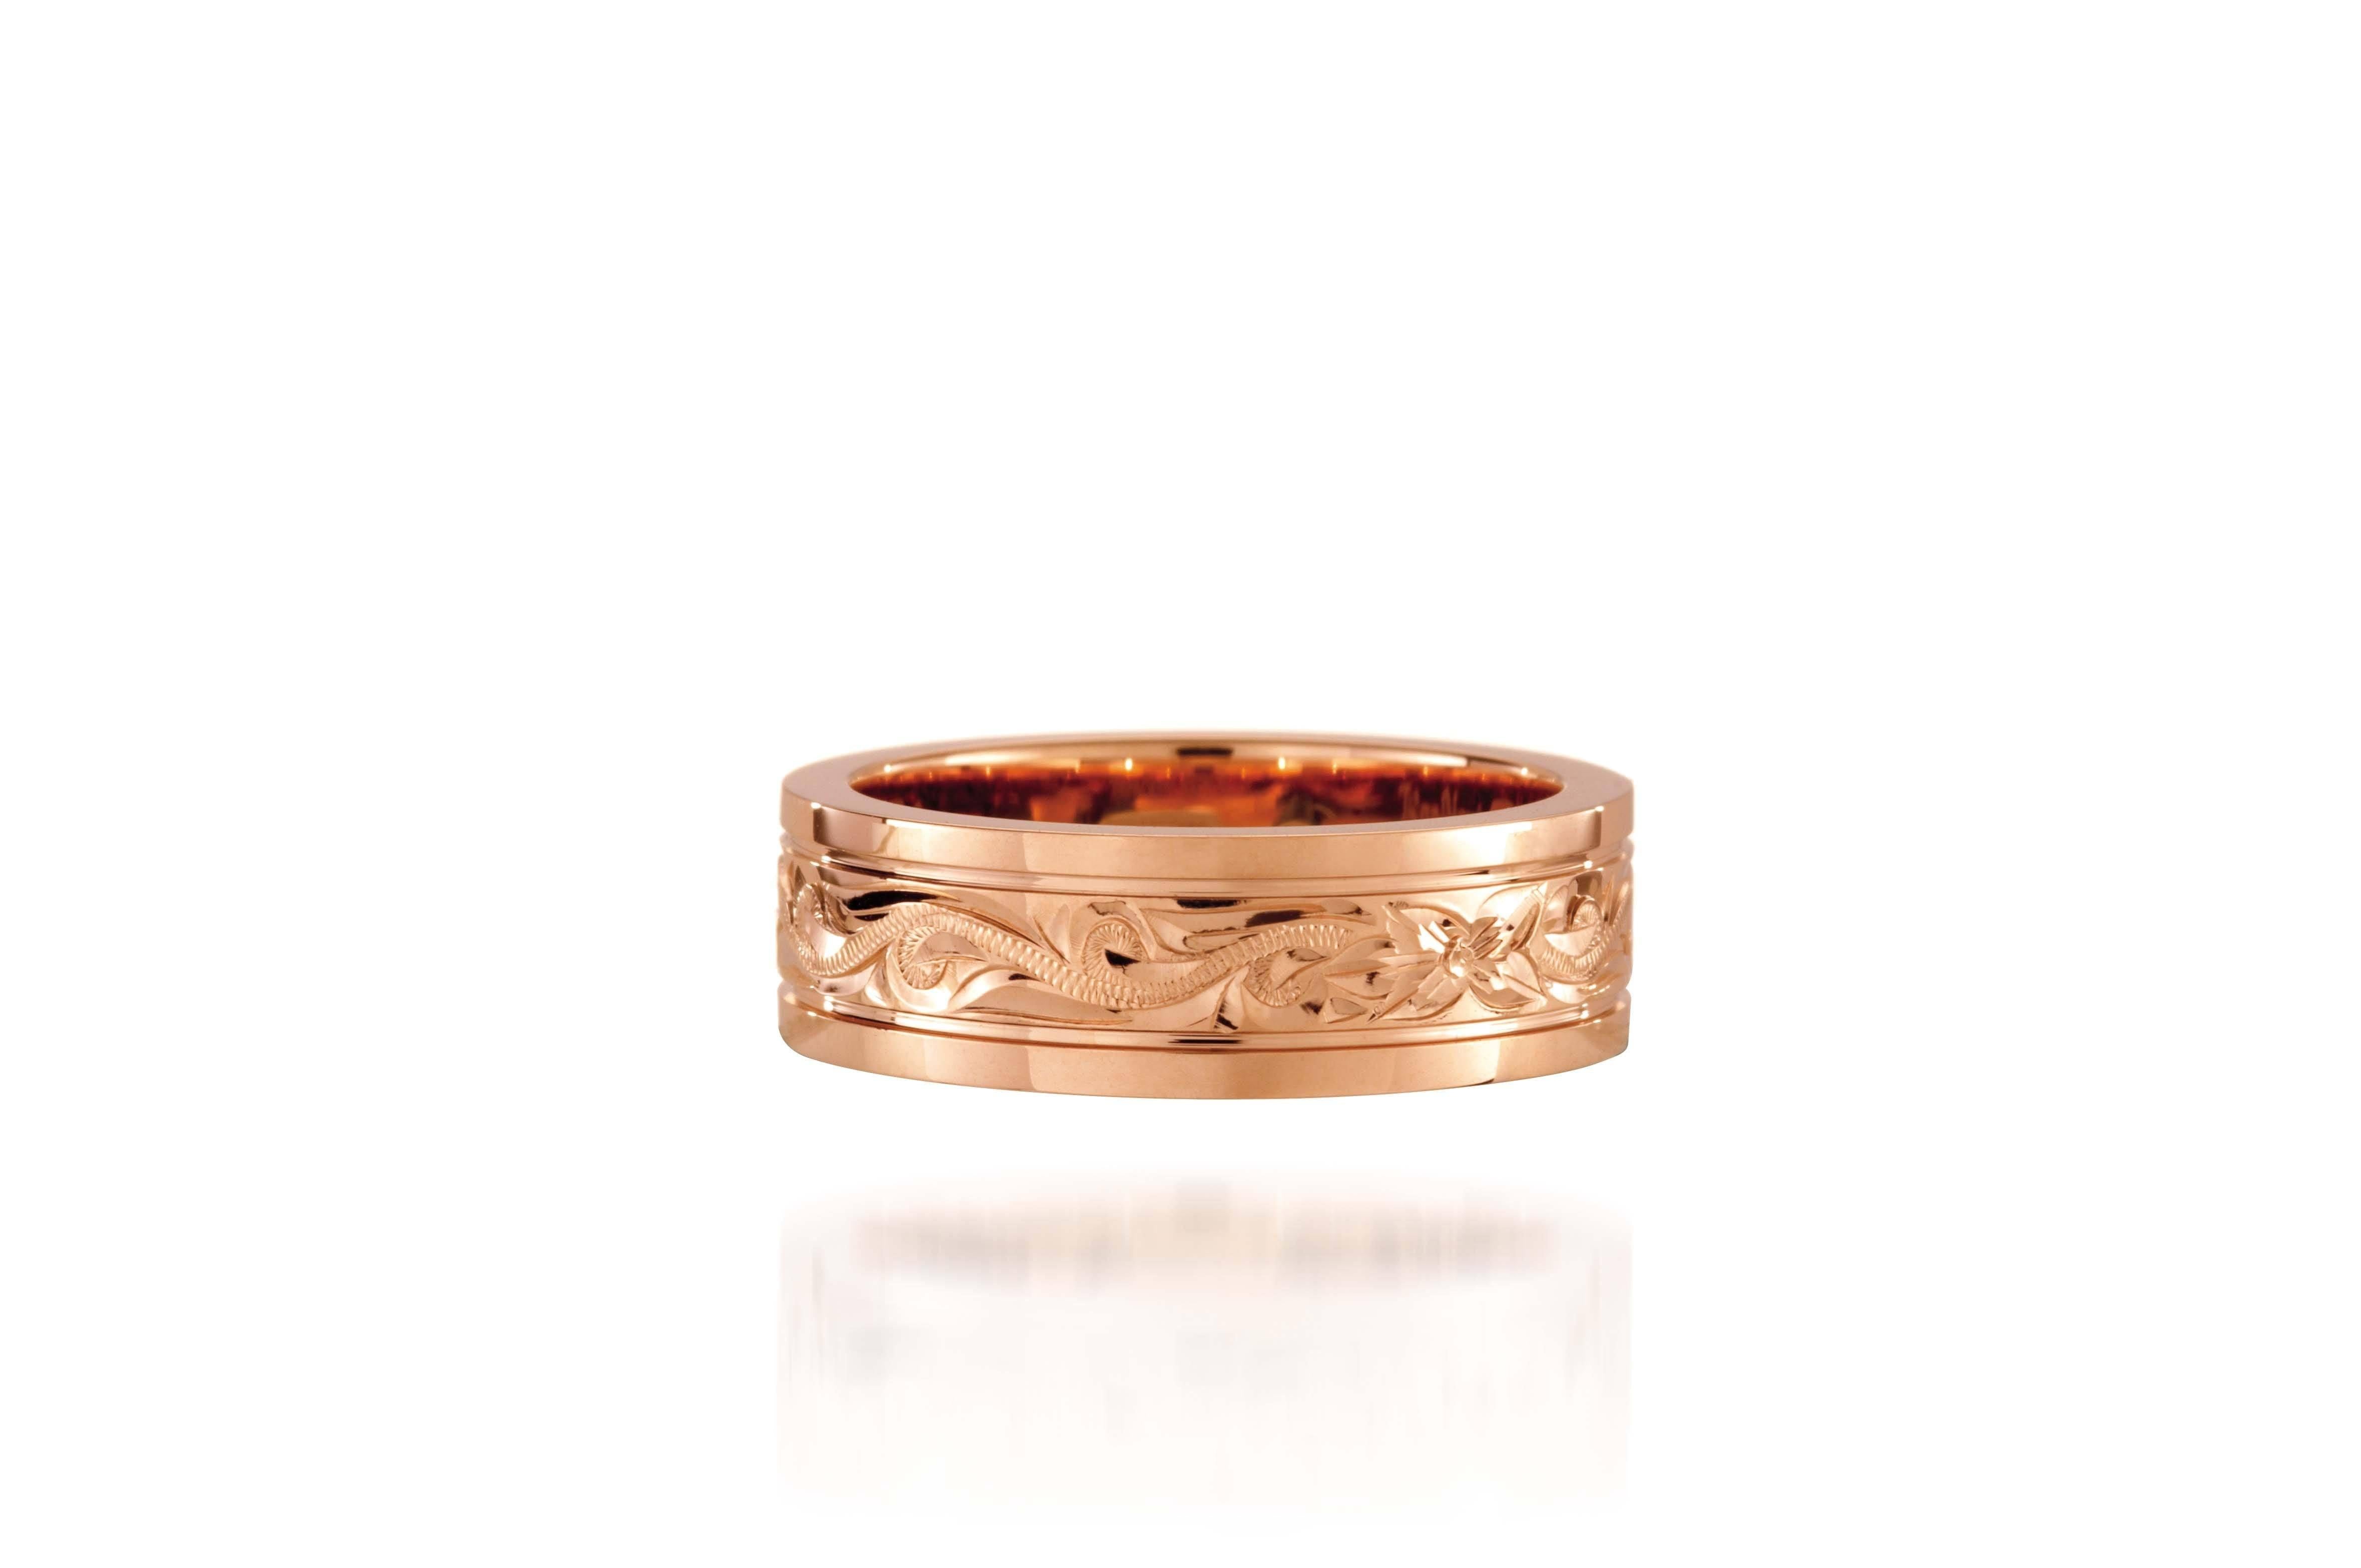 In this photo there is a rose gold ring with flower and scroll hand-engravings.